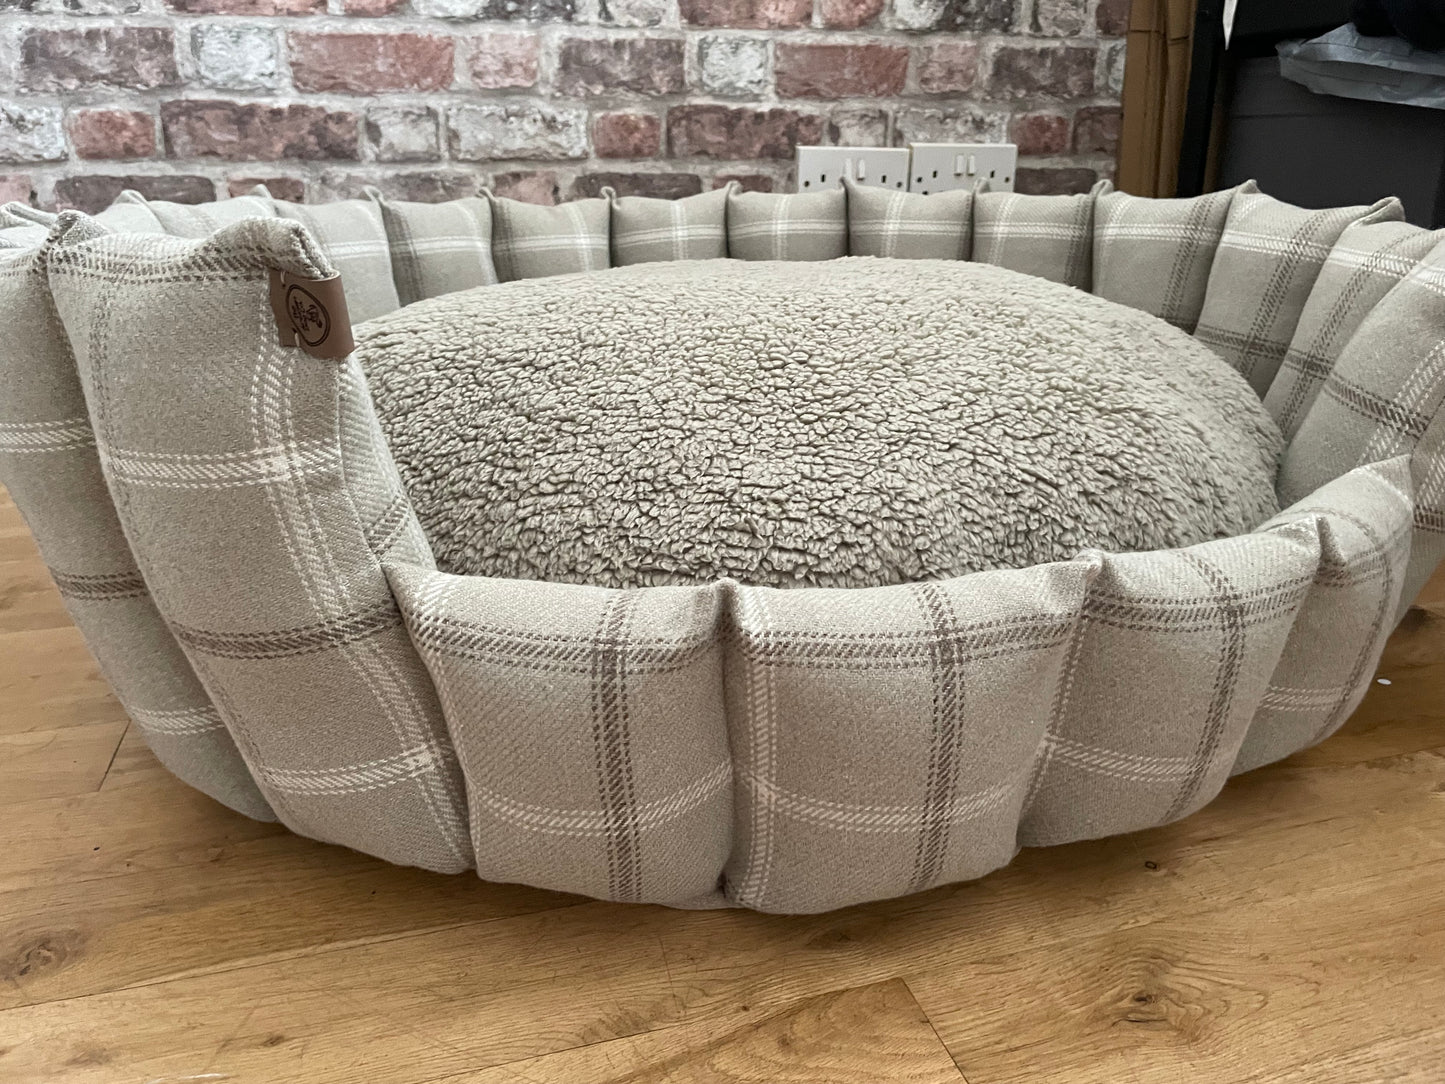 Luxury Handcrafted Pocket Sided Pet Bed - The Haldon Collection Taupe Check